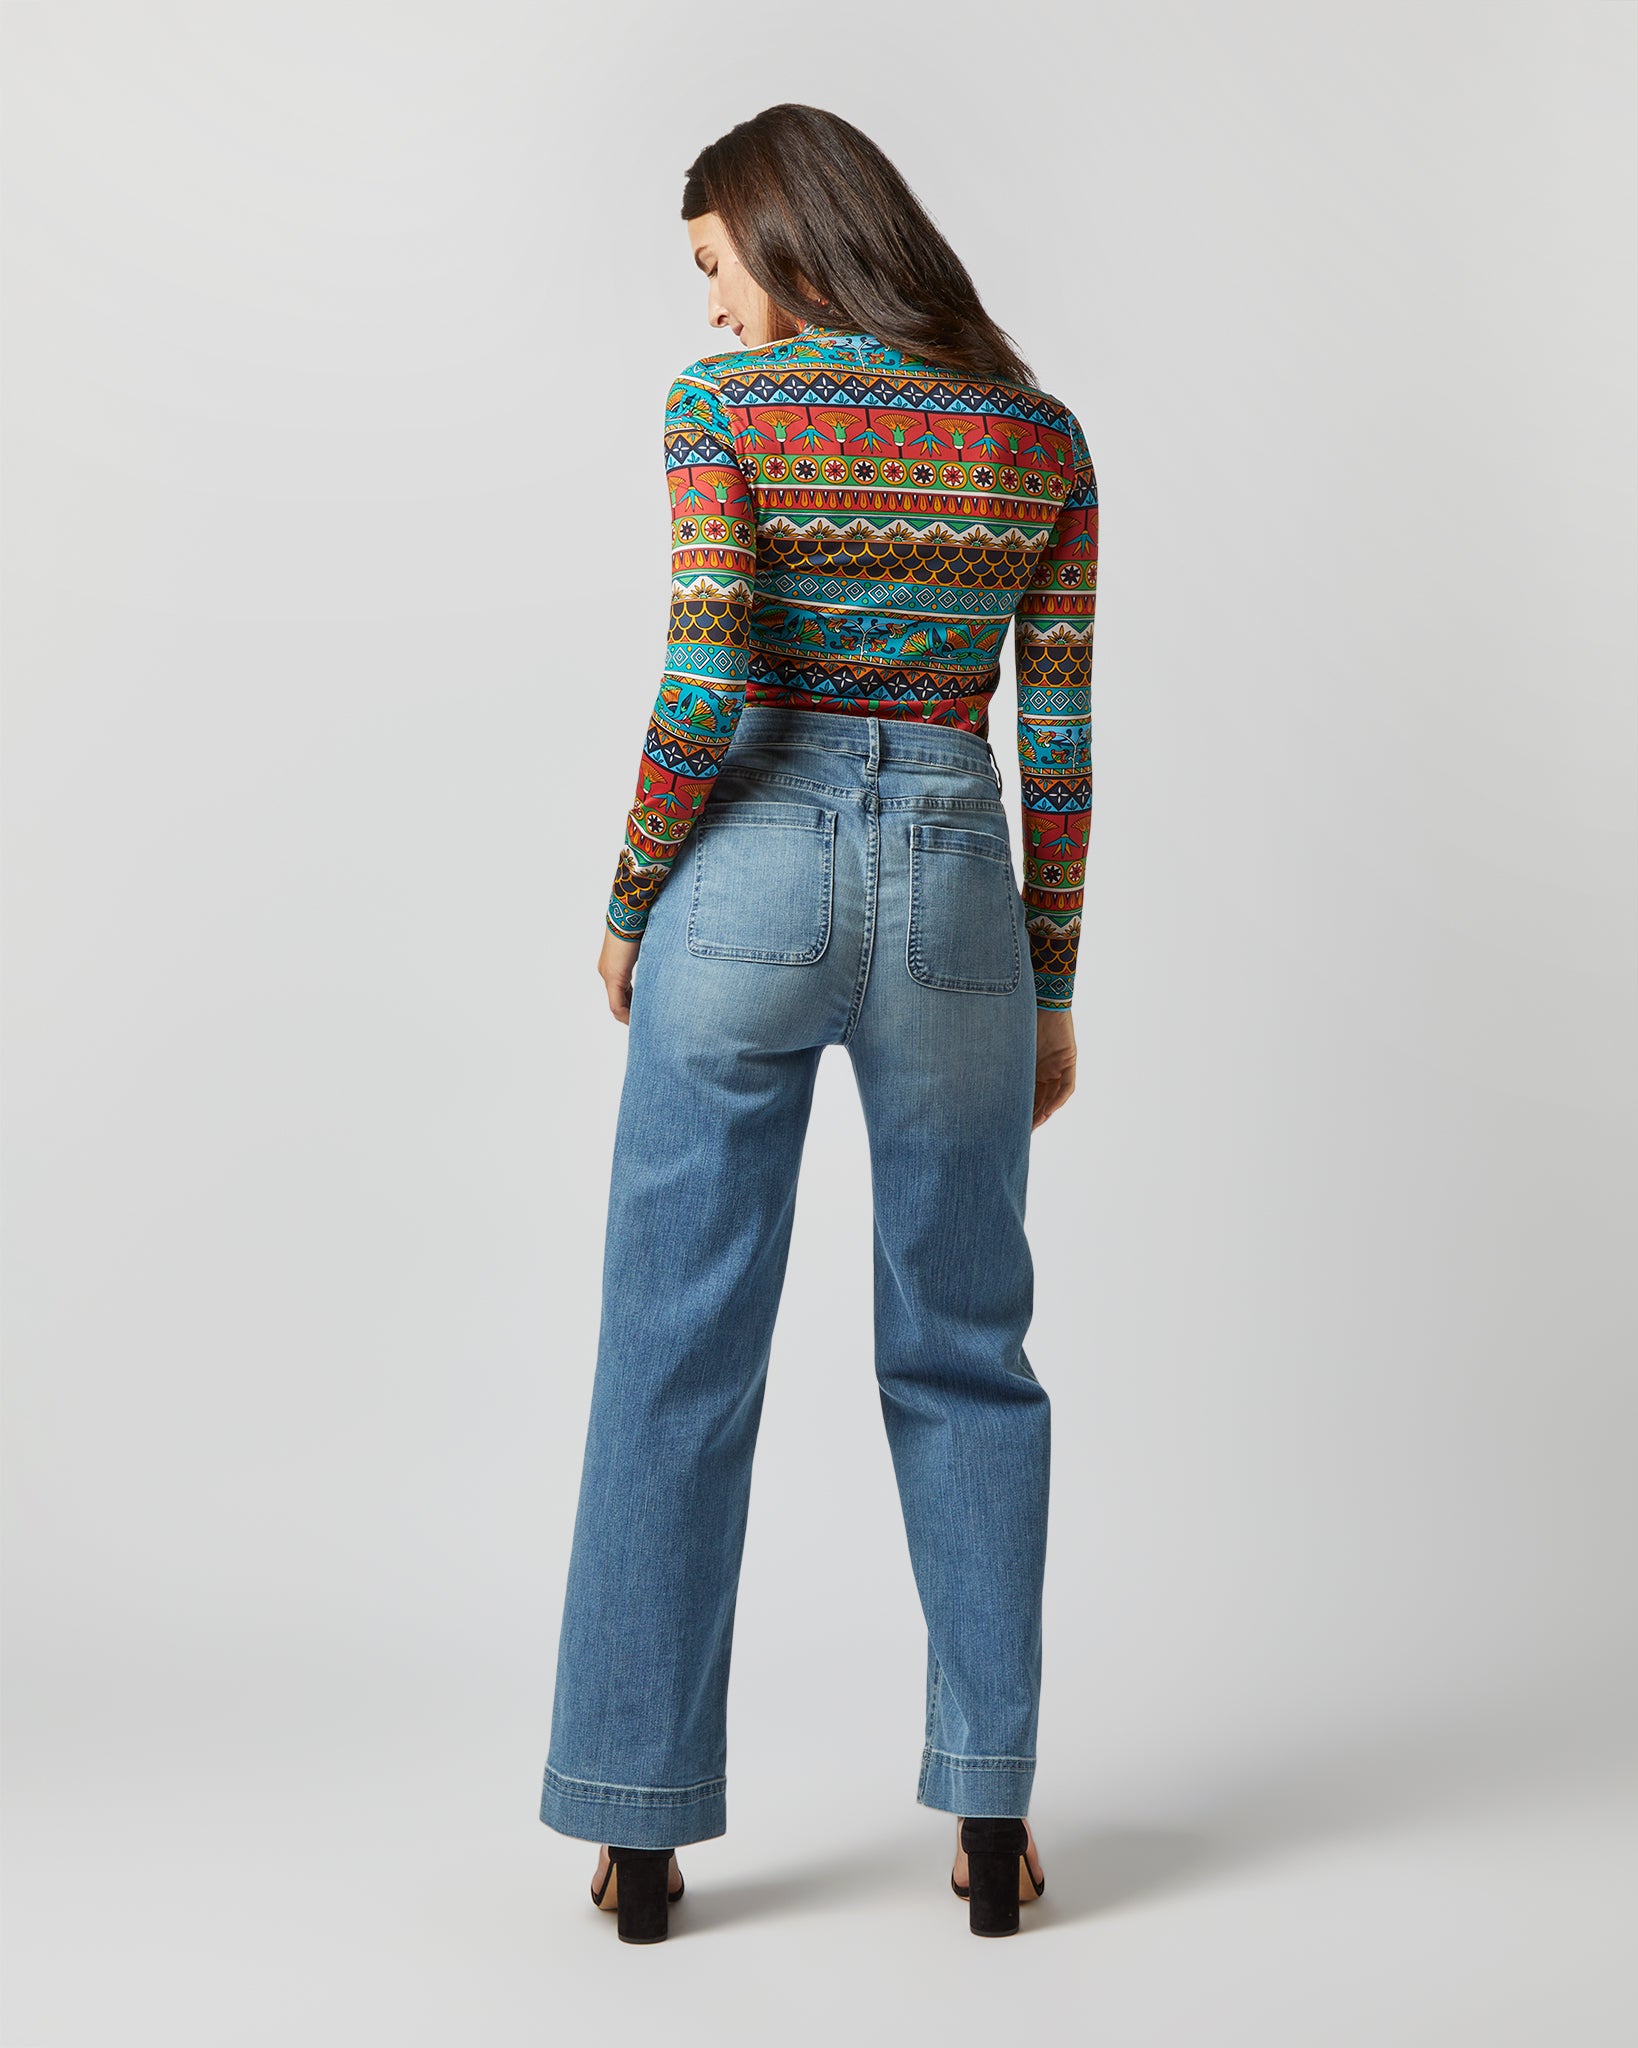 Turtleneck in Giza Turquoise Skinny Jersey